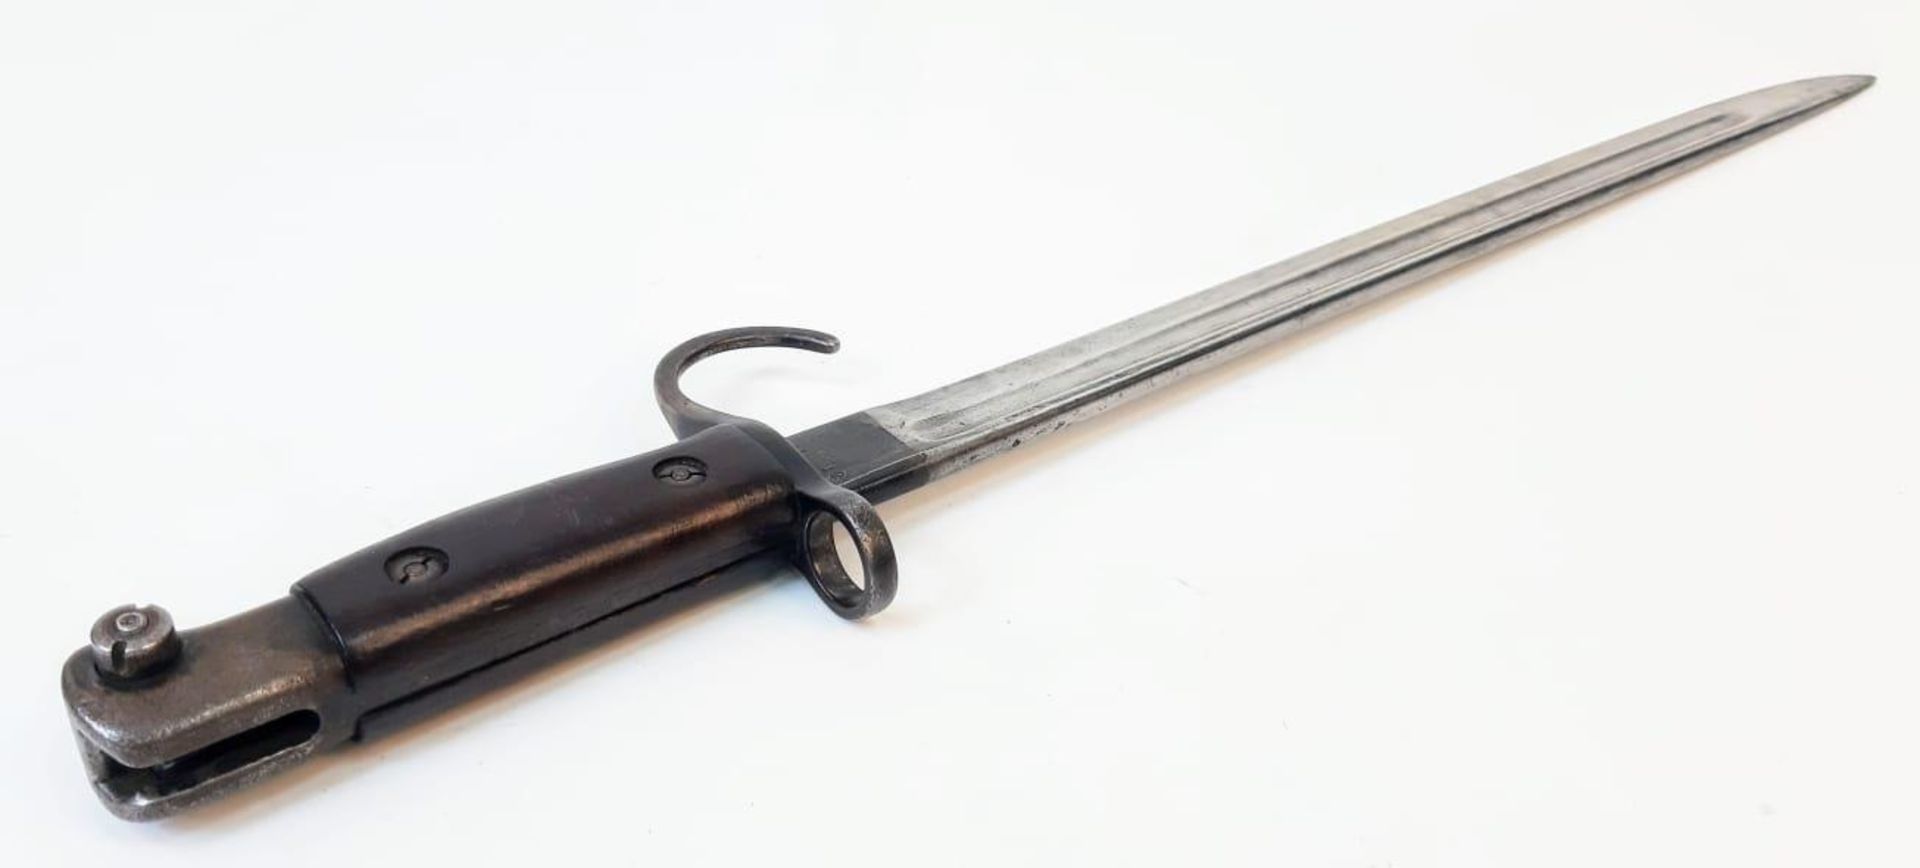 1912 Dated Hooked Quillion Bayonet. Maker: Sanderson. Unit Marked 2.R.H. - Image 4 of 11